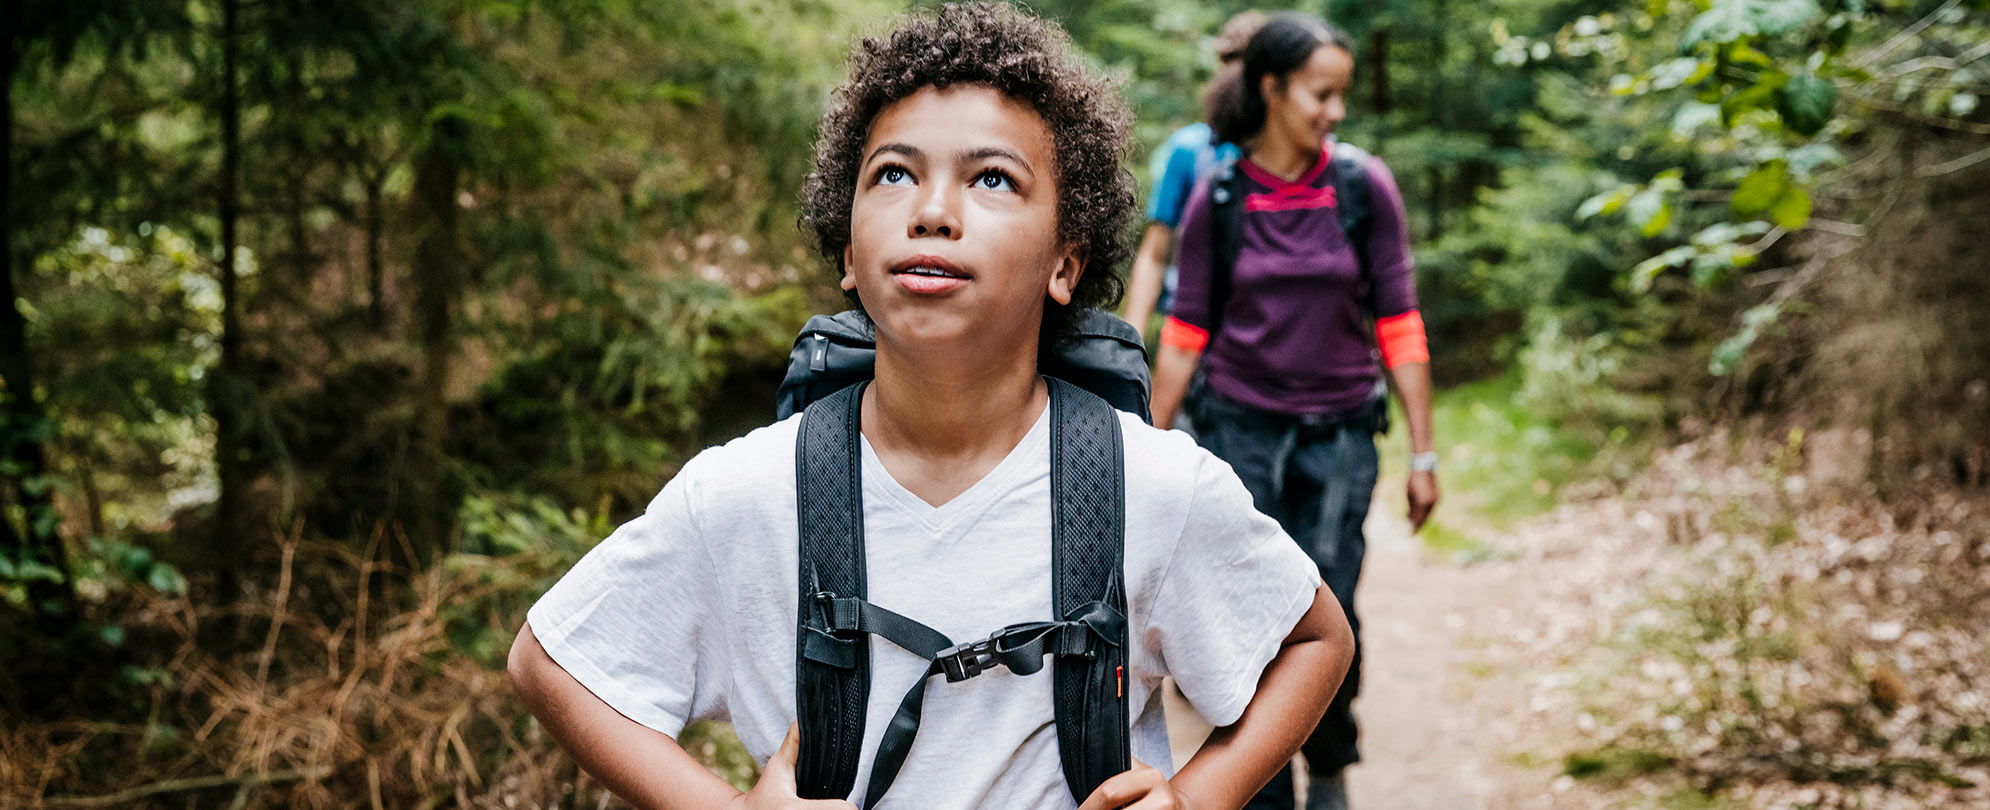 A pre-teen boy takes in the views as he backpacks on a trail through the forest with a young woman and man following behind him.